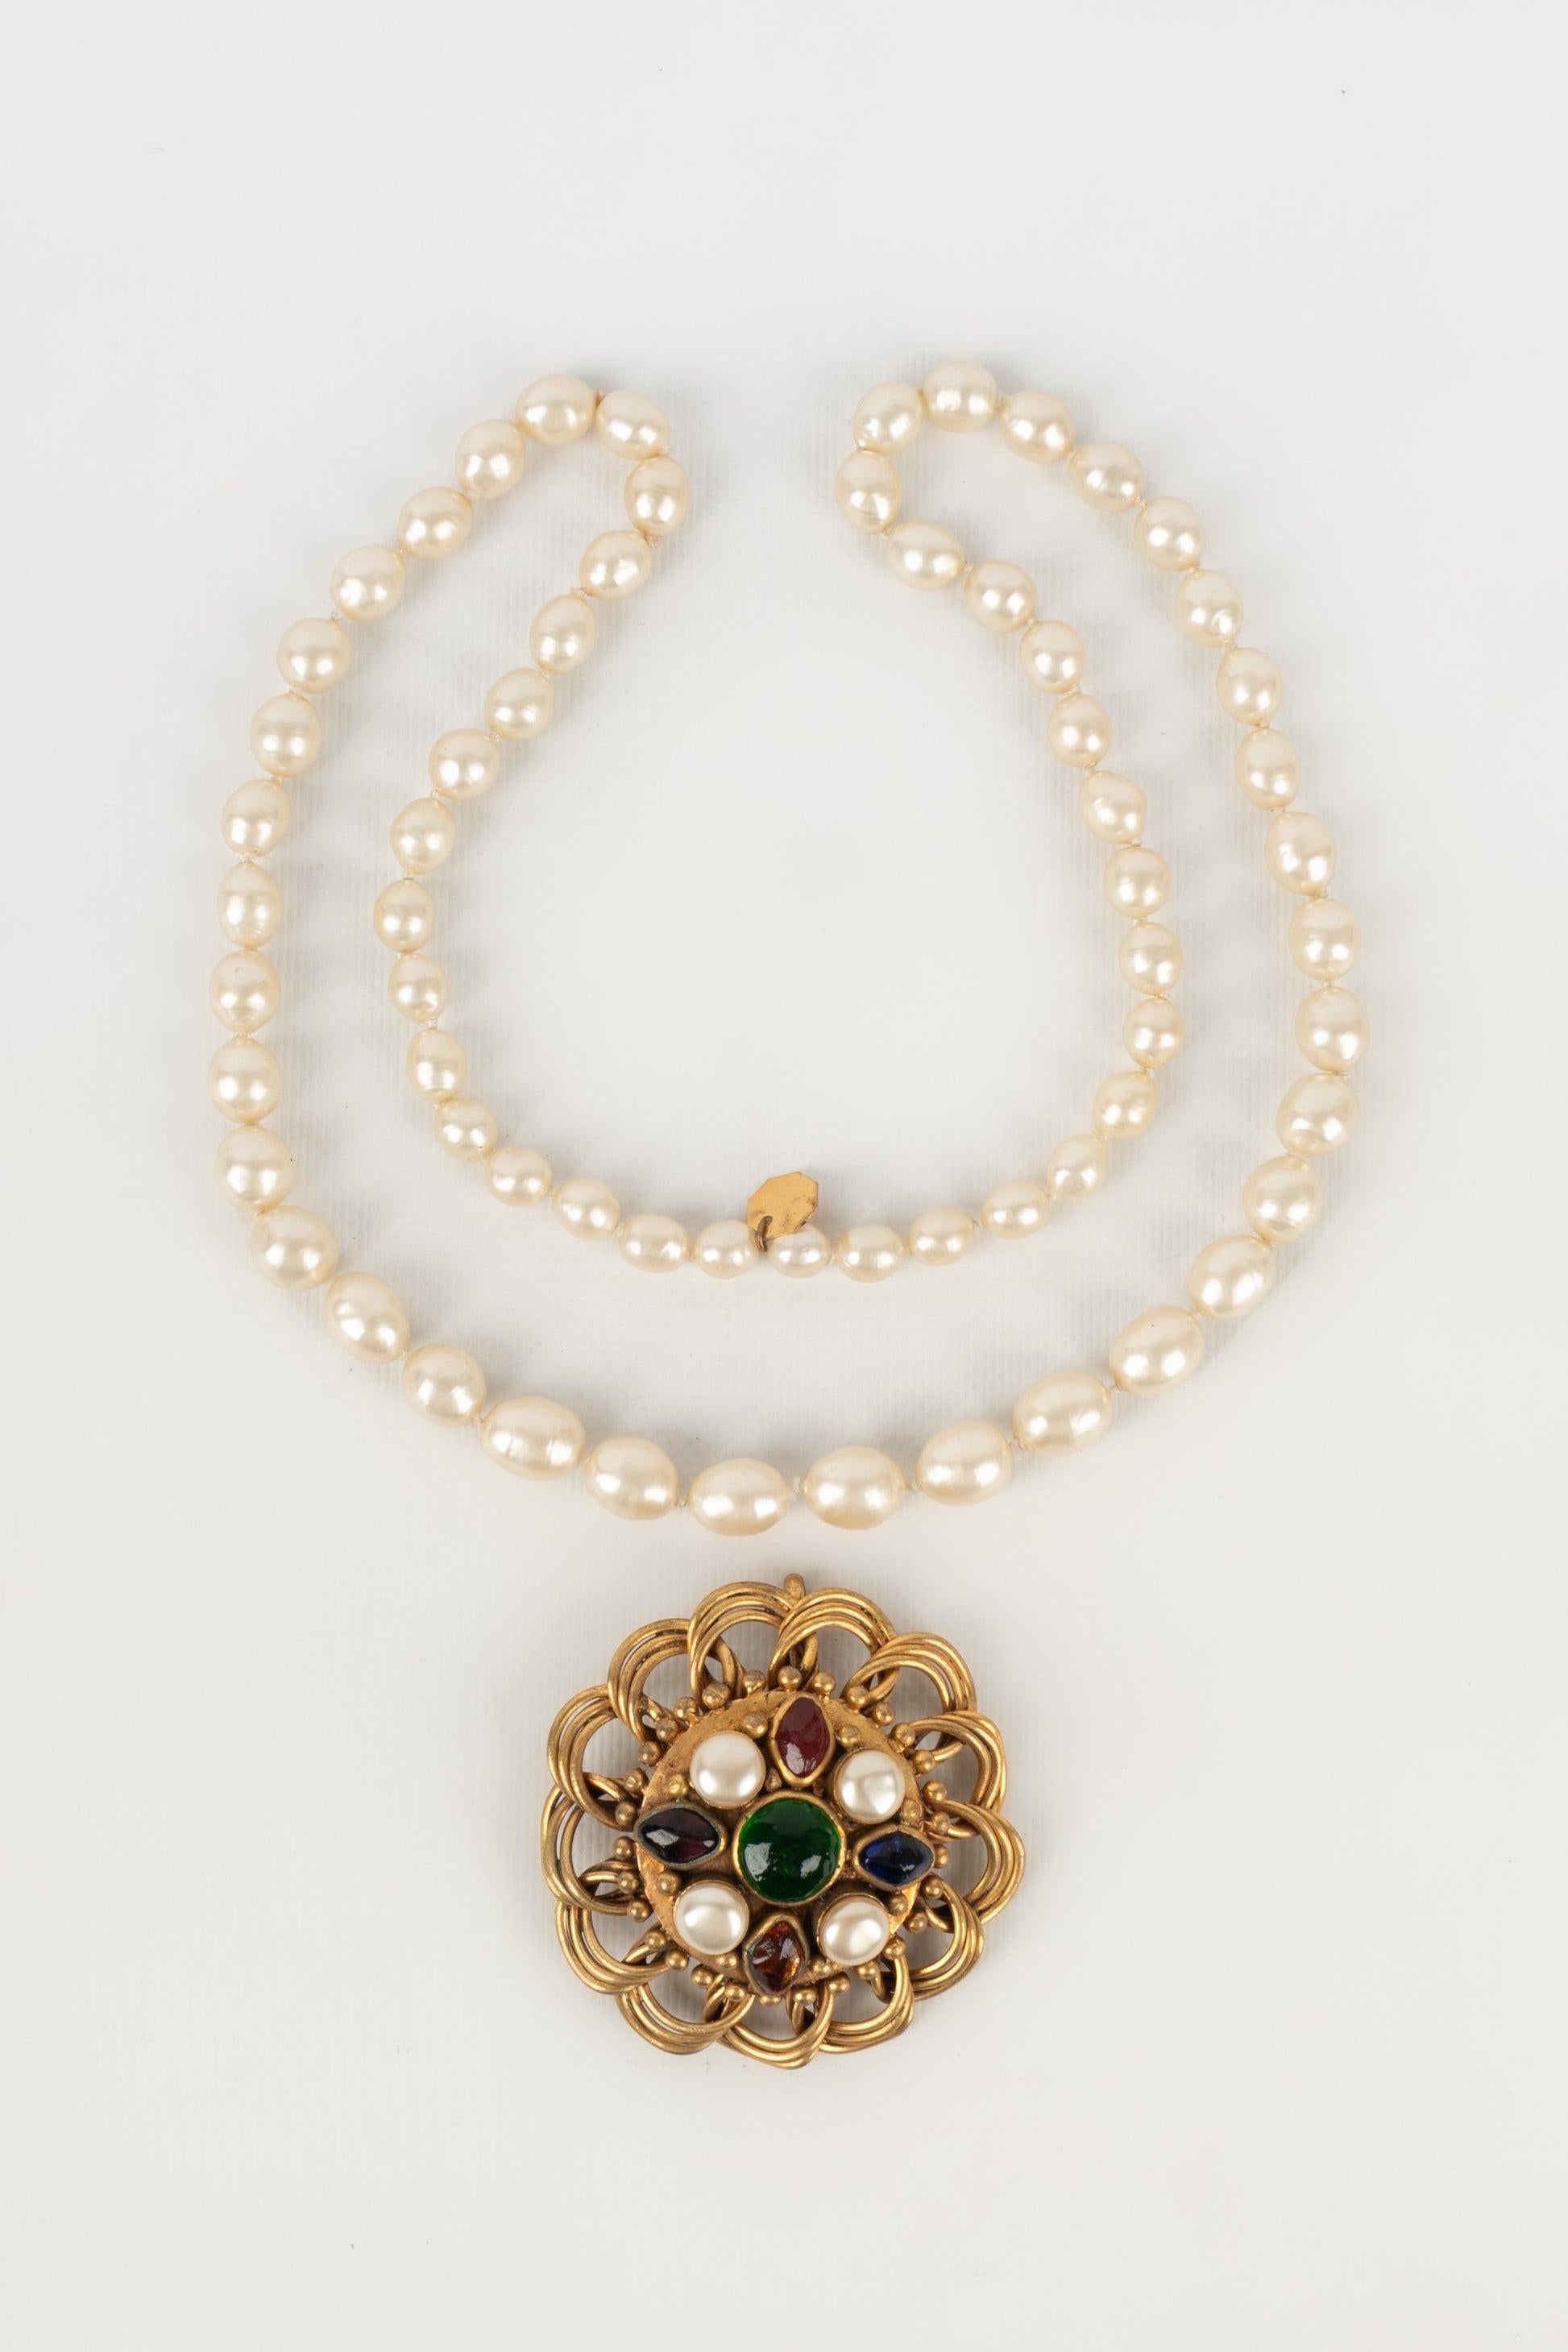 Women's Chanel Costume Pearl Necklace with a Golden Metal Pendant For Sale